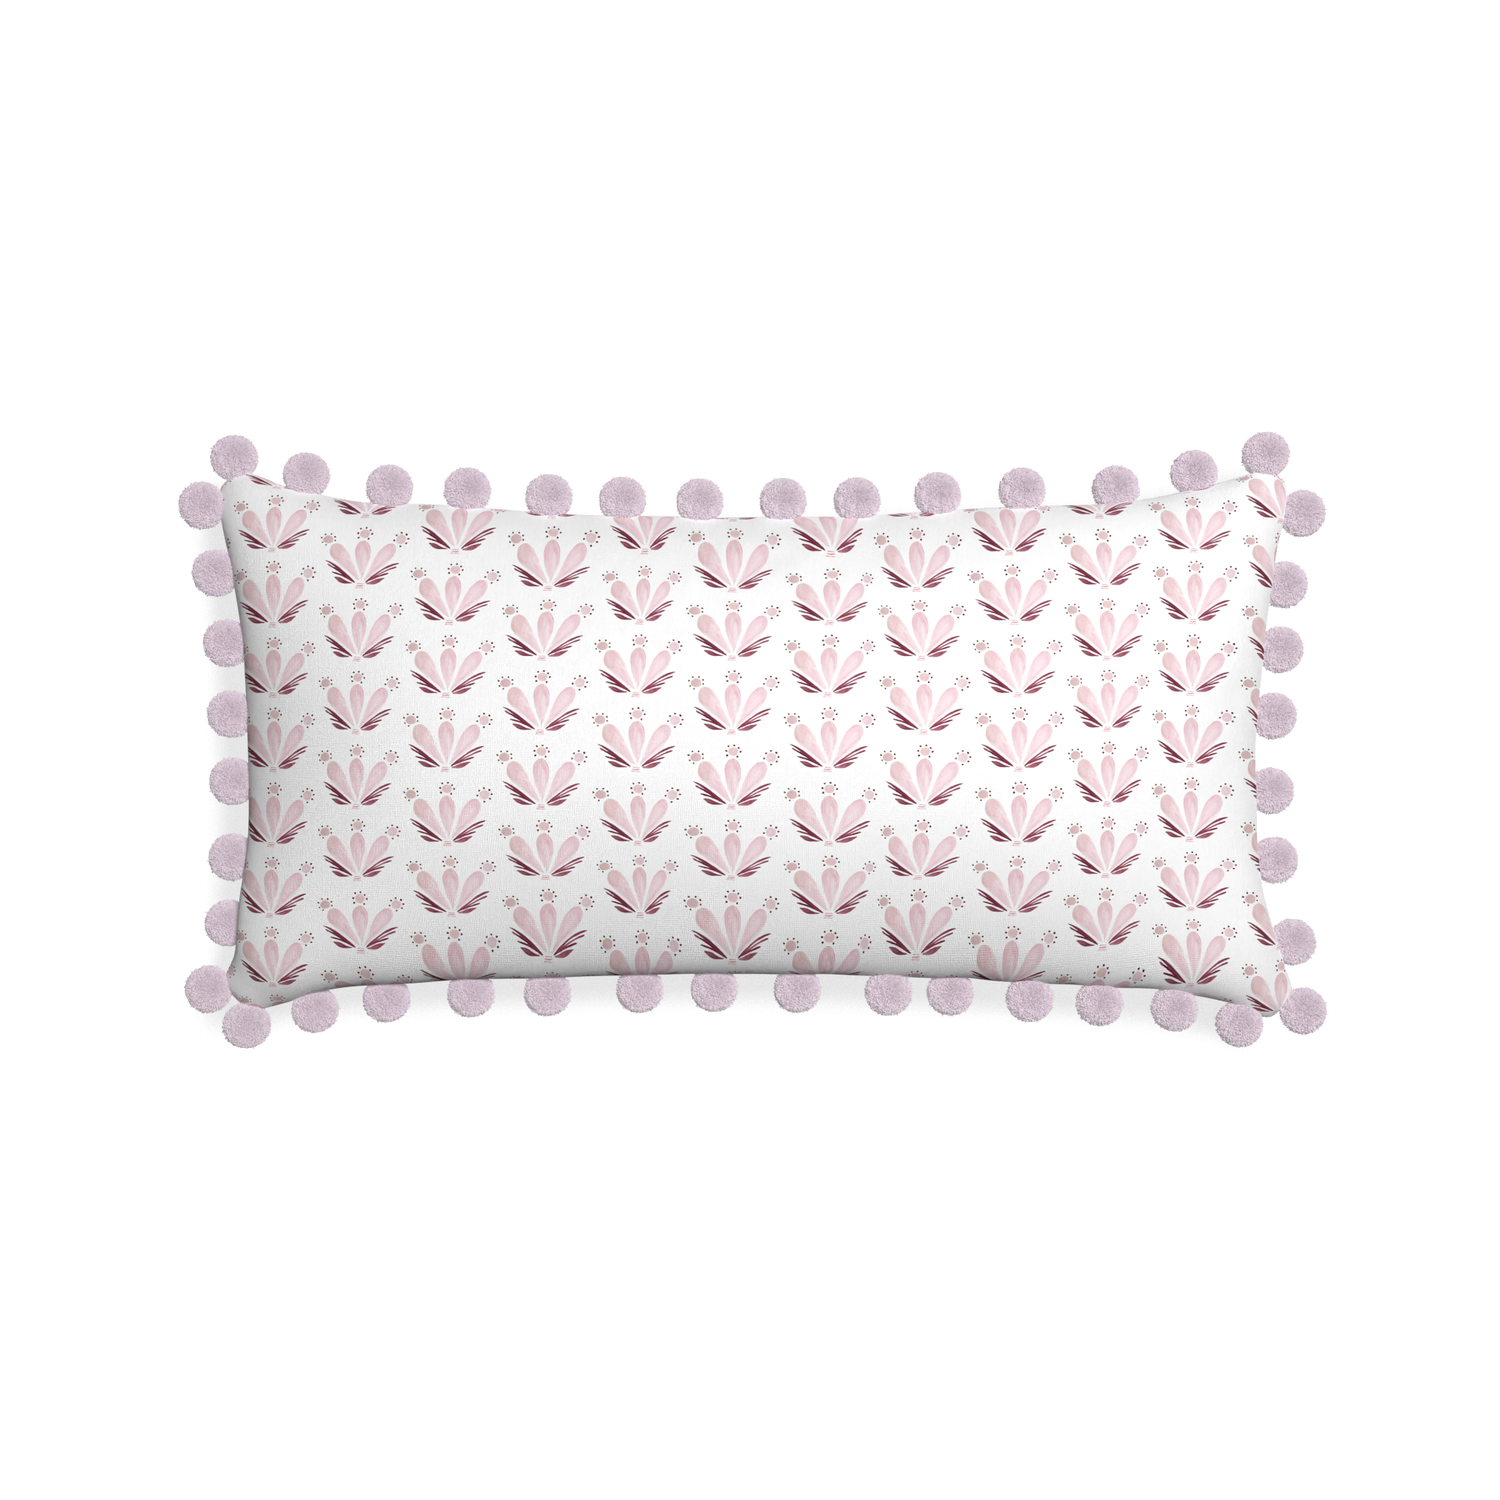 Midi-lumbar serena pink custom pink & burgundy drop repeat floralpillow with l on white background